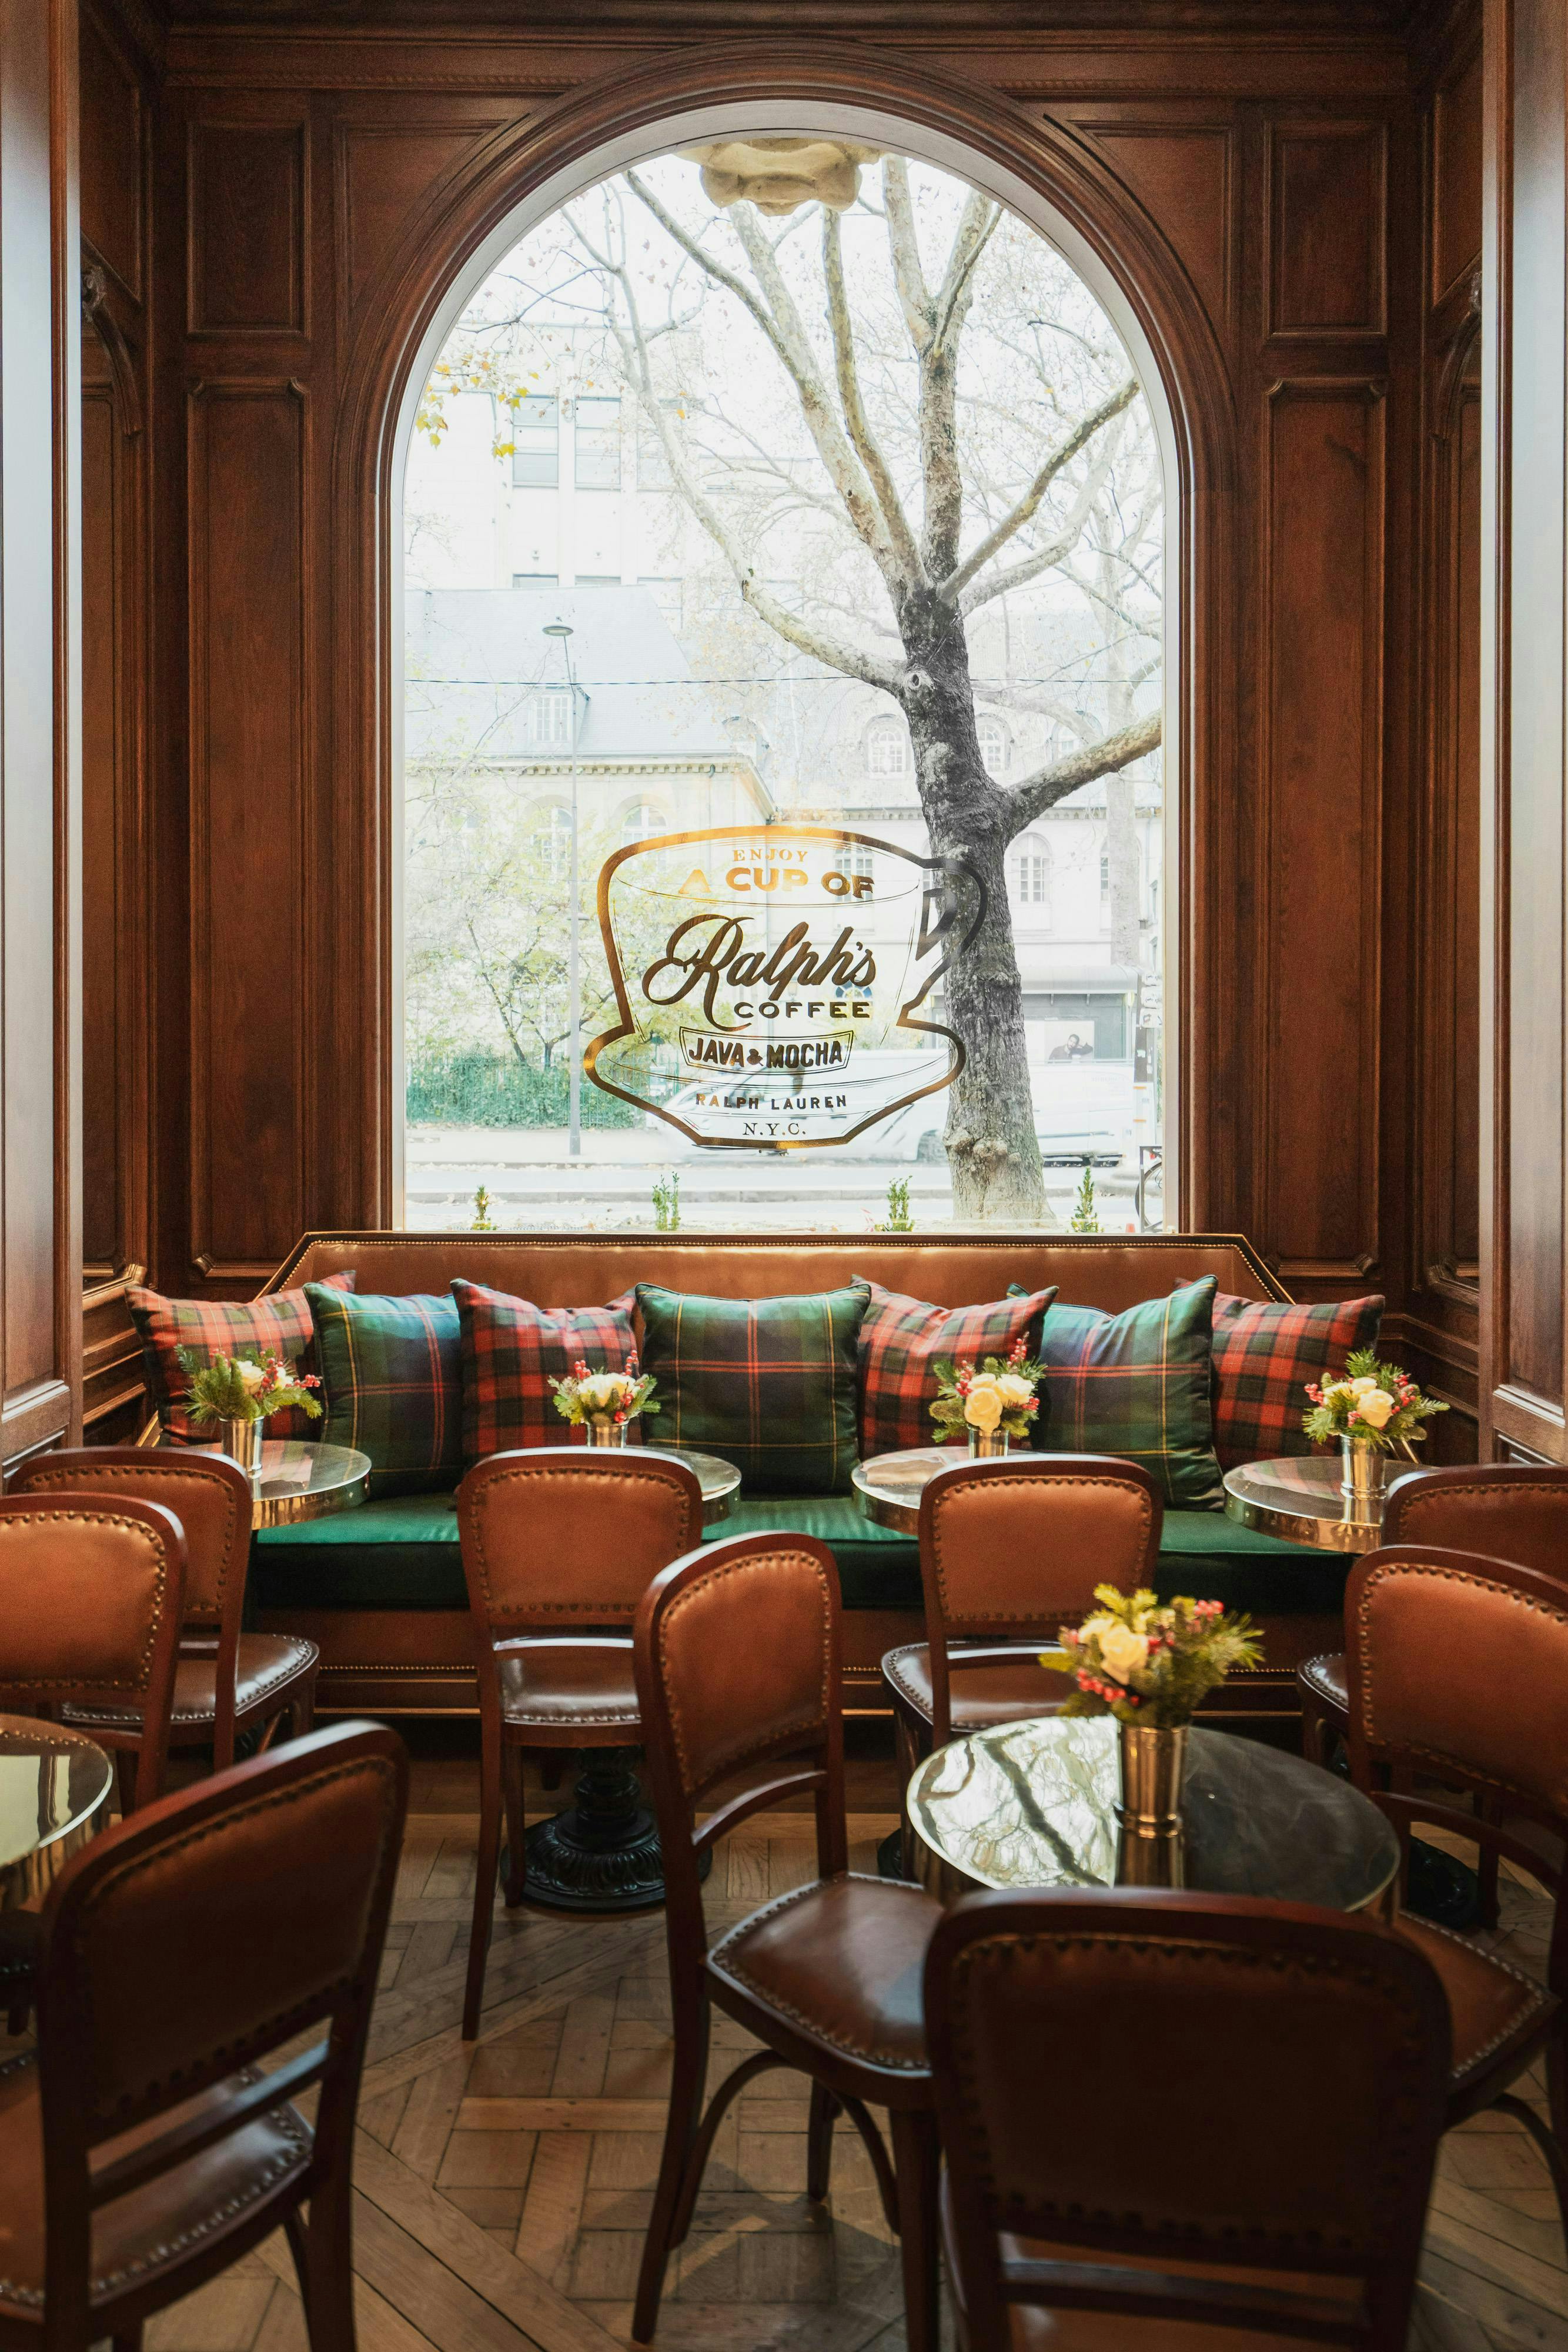 paris coffee shops: ralph's coffee interior and seating